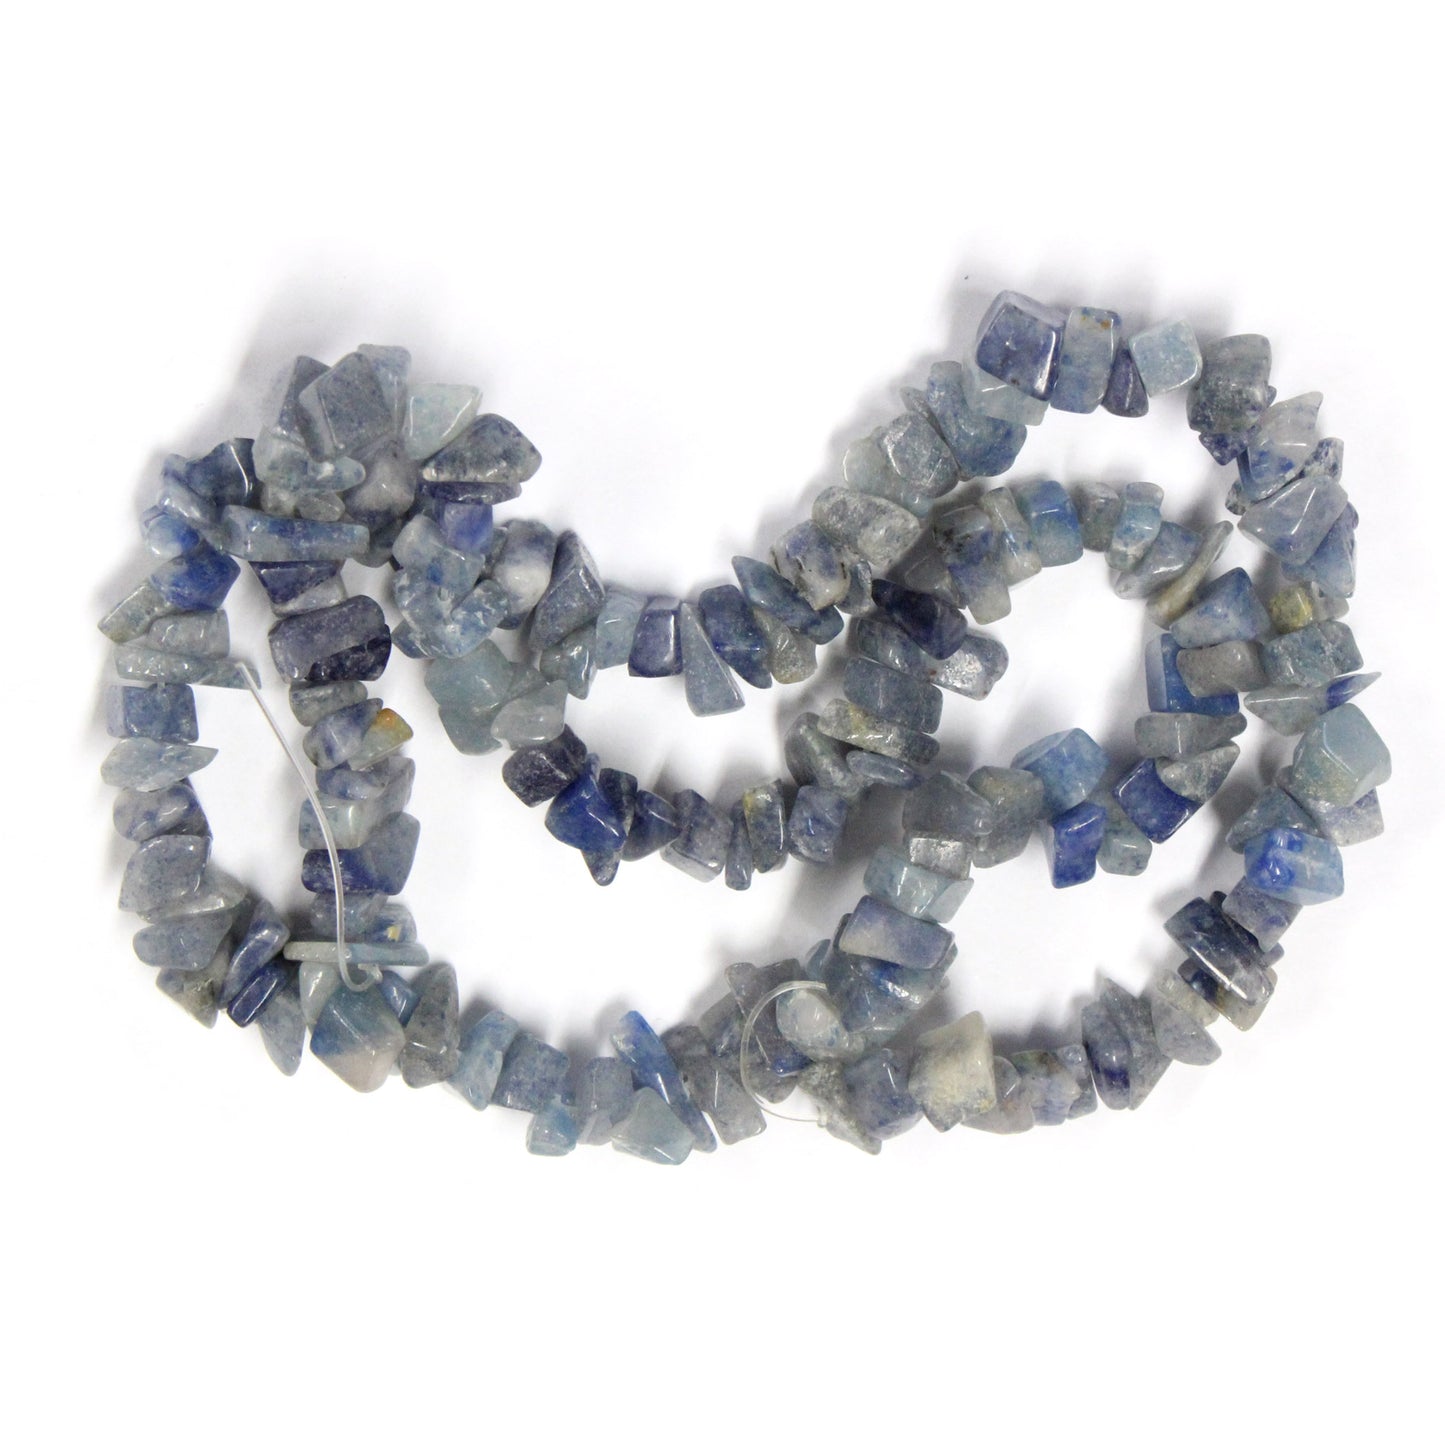 Sky Quartz Chip Beads / 16 Inch strand / 5-10mm chips / natural opaque glossy polished stone